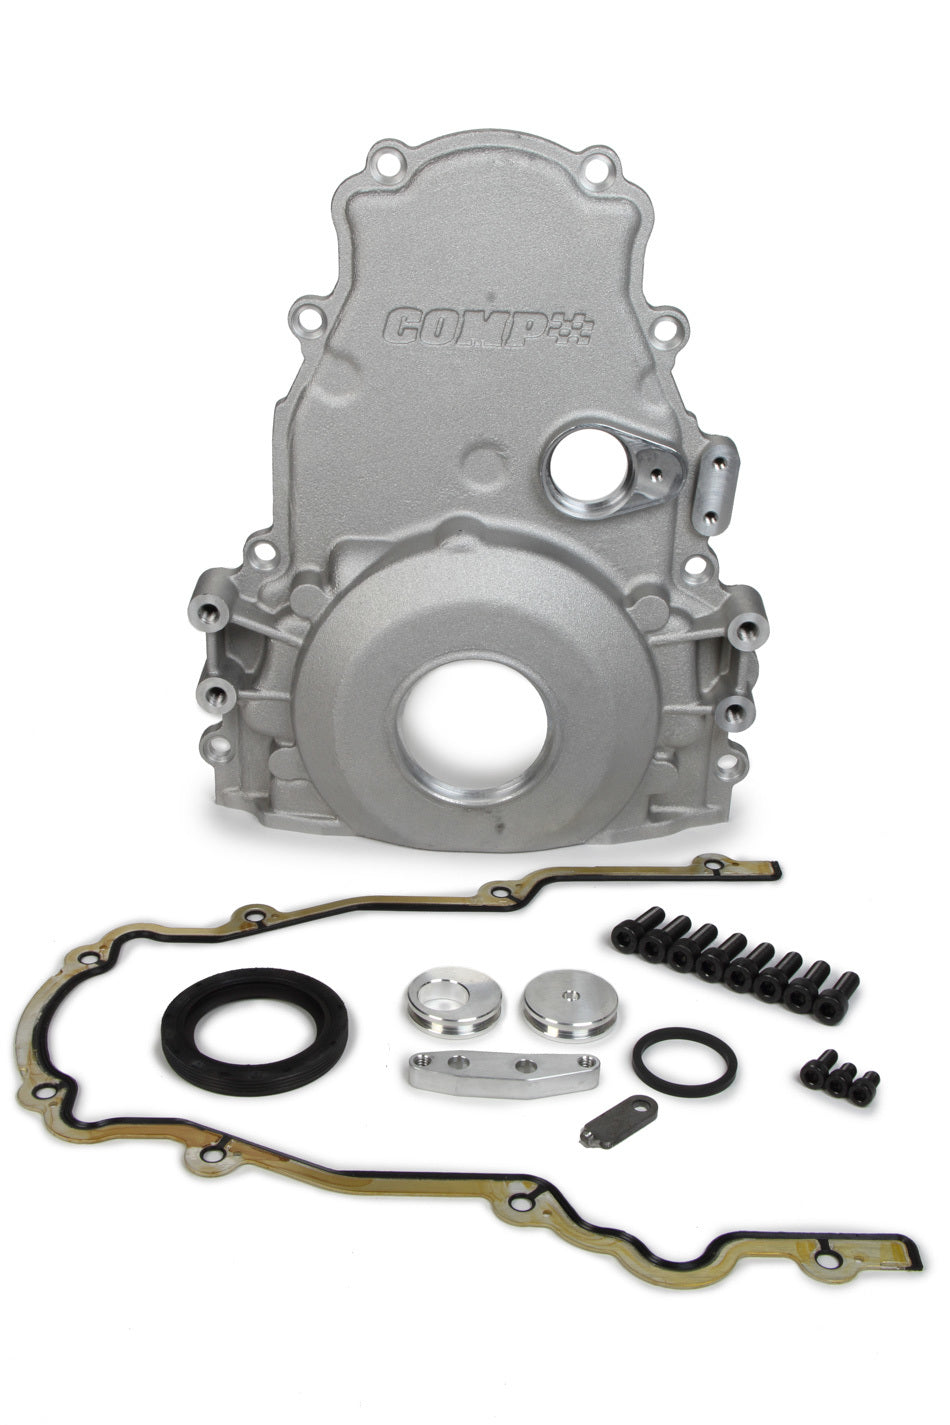 LS1-6 Front Cover Kit